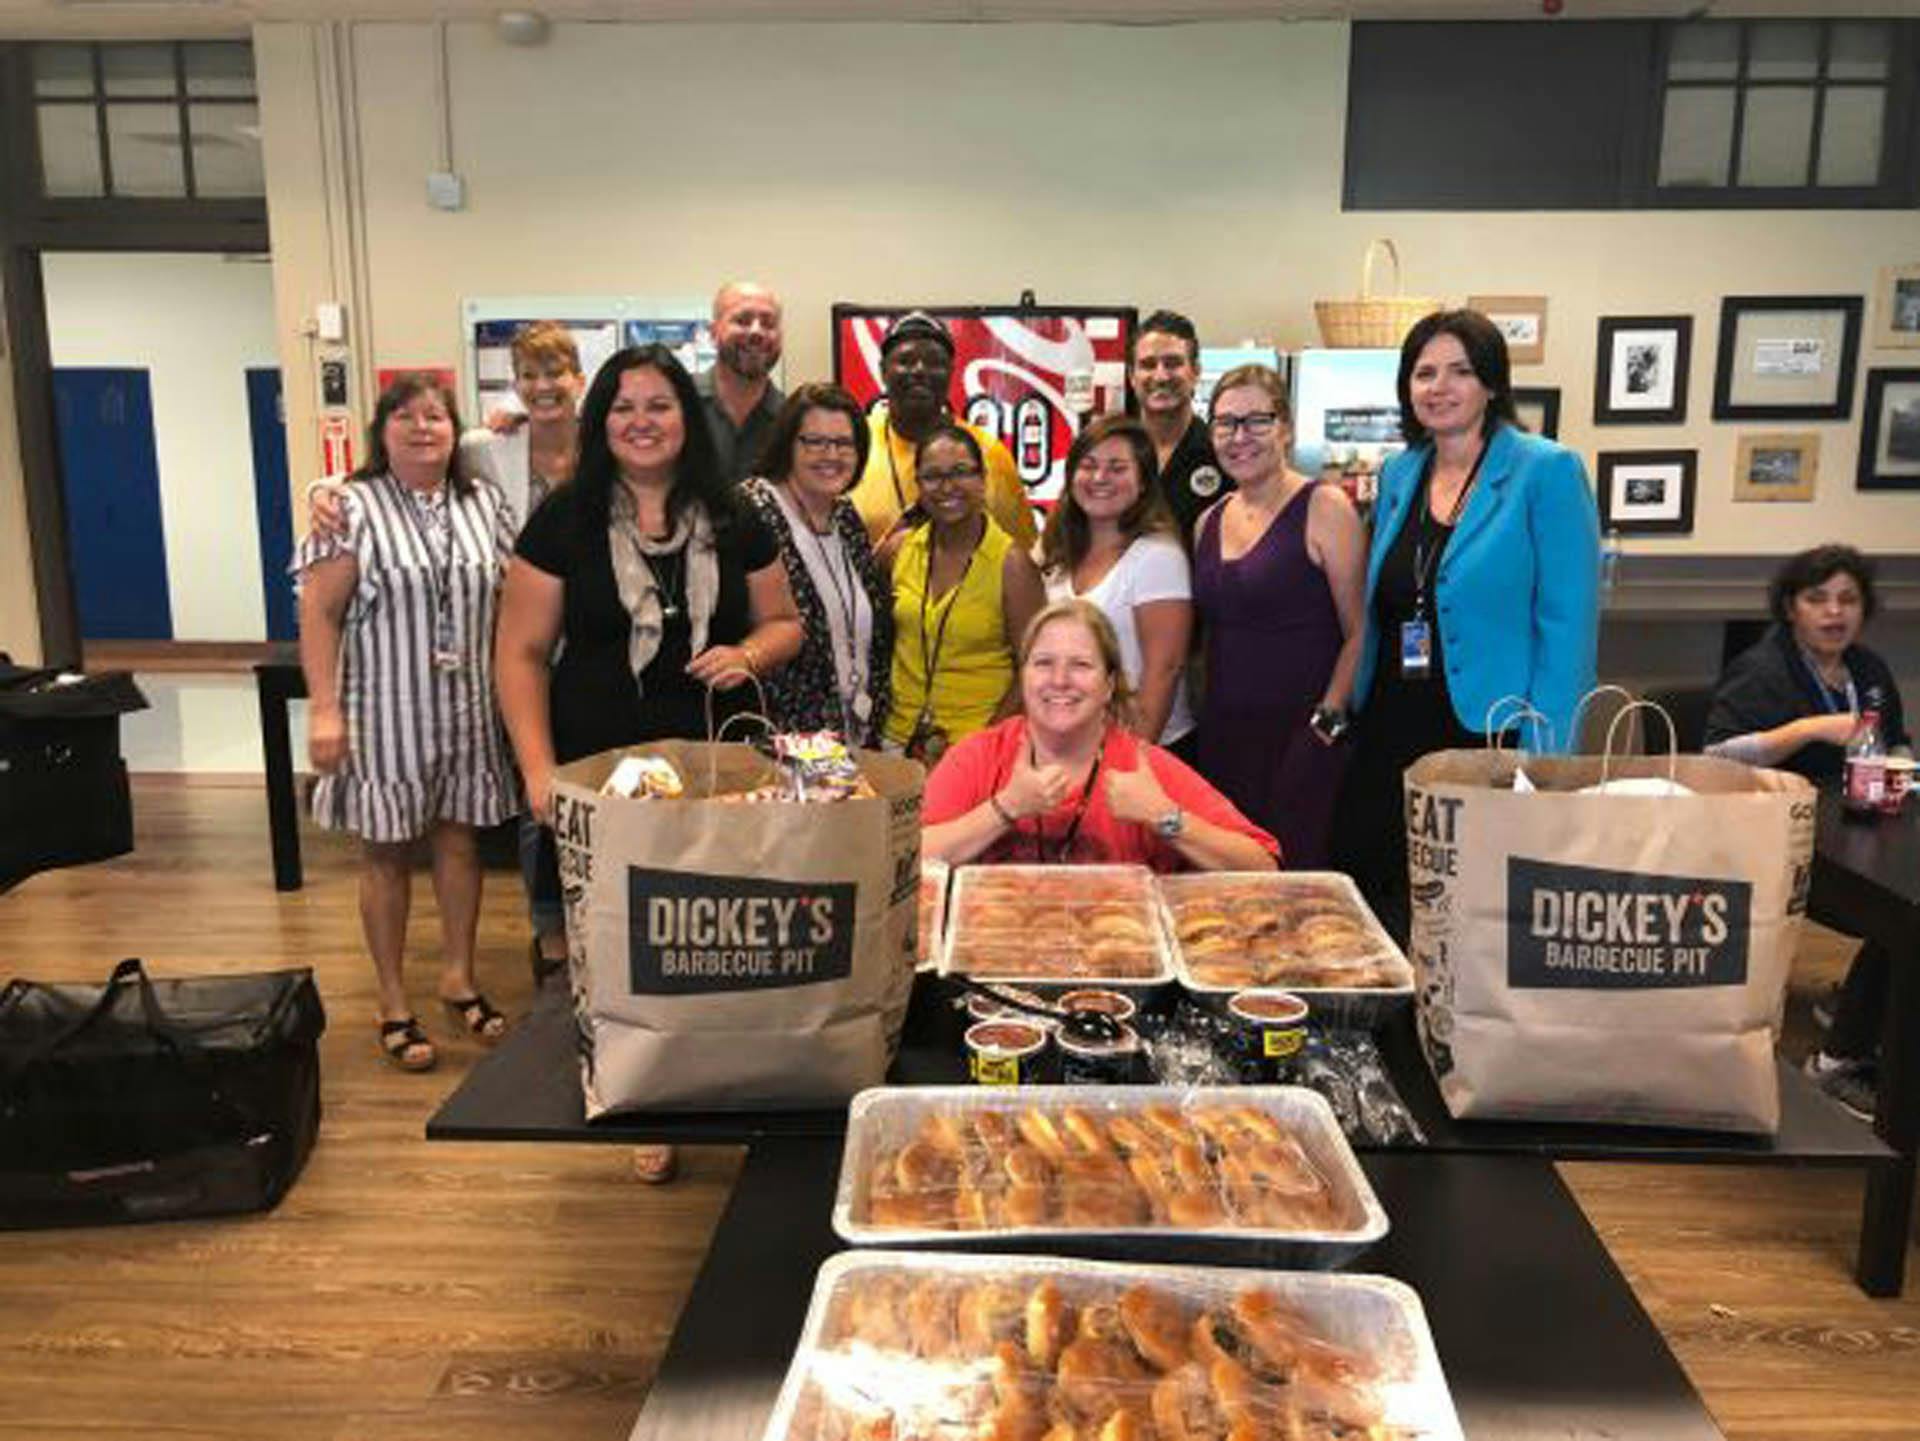 Dickey's Barbecue Pit Serves Up Lunch for Teachers